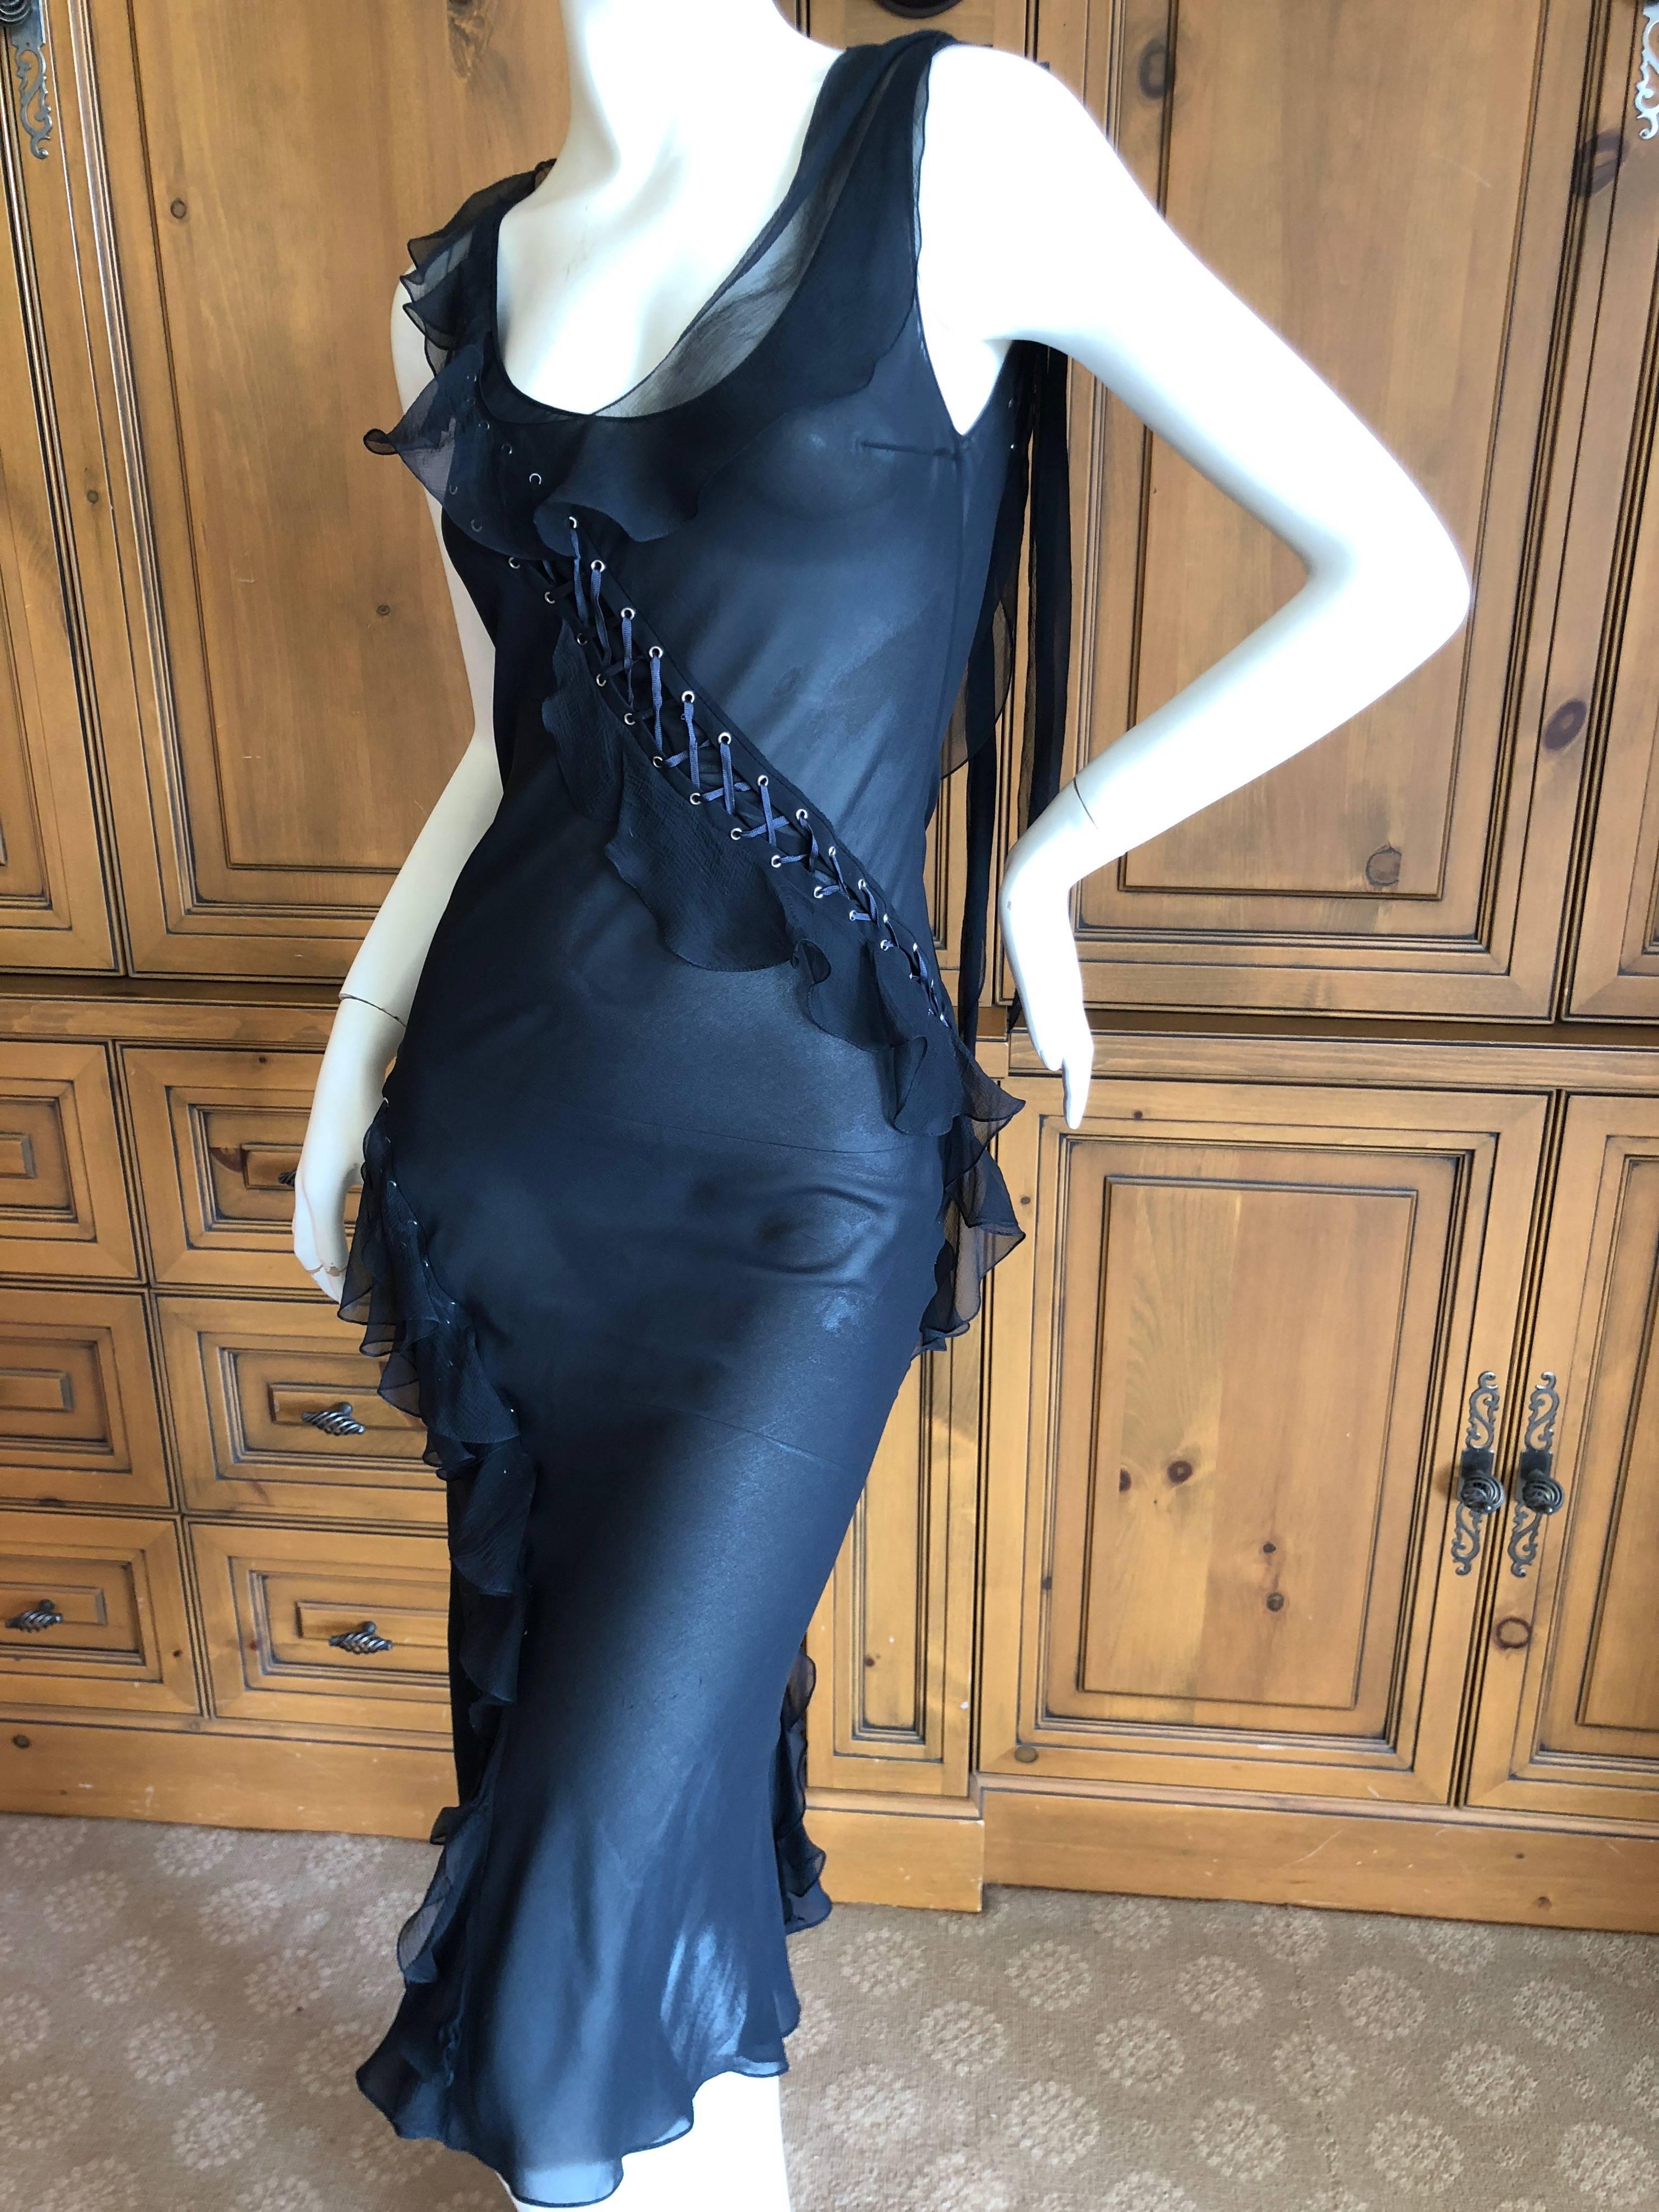 Christian Dior by John Galliano Vintage Sheer Black Dress Corset Lace Up Details 1